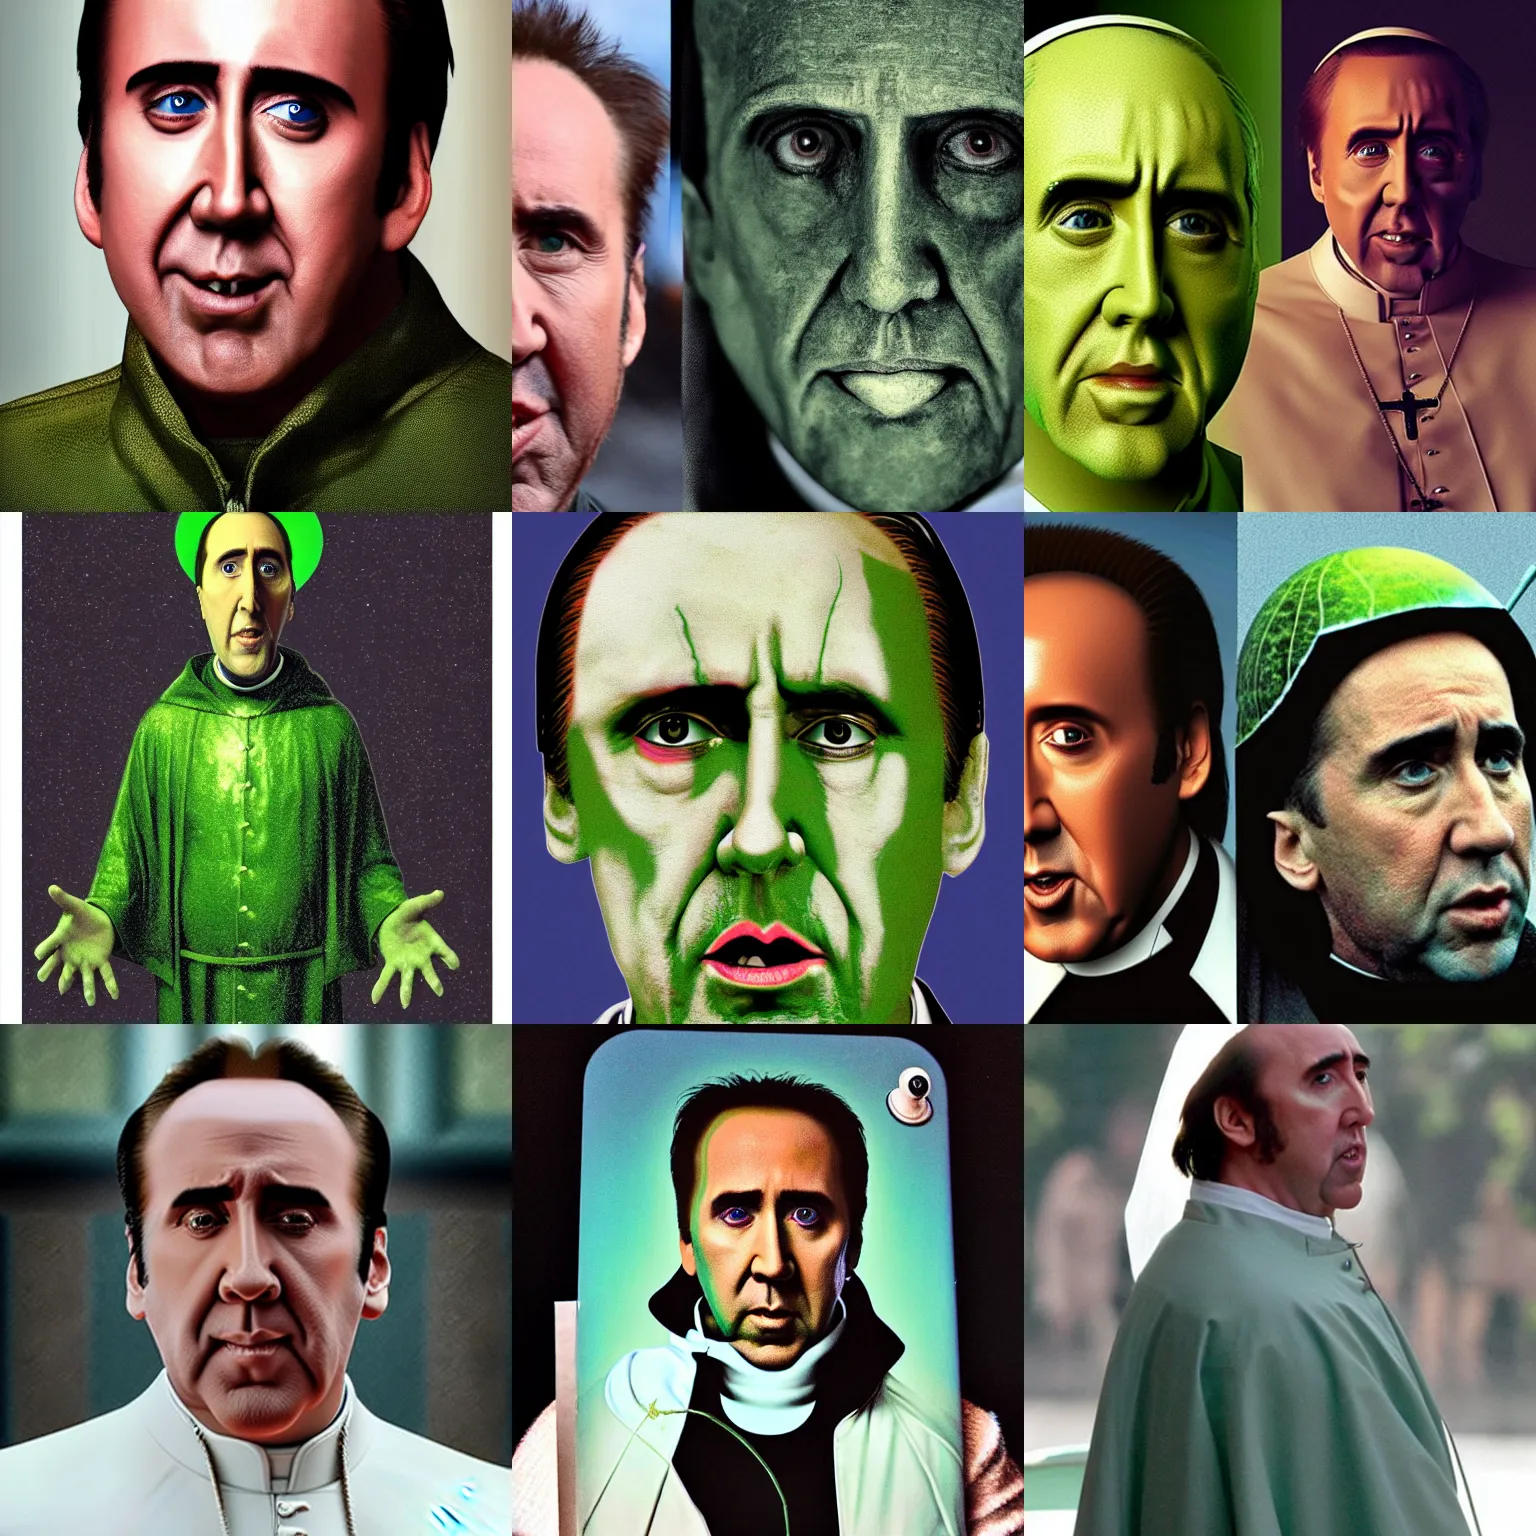 Prompt: Nicolas Cage as the Pope, secretly an extraterrestrial alien, green skin, three eyes, photograph